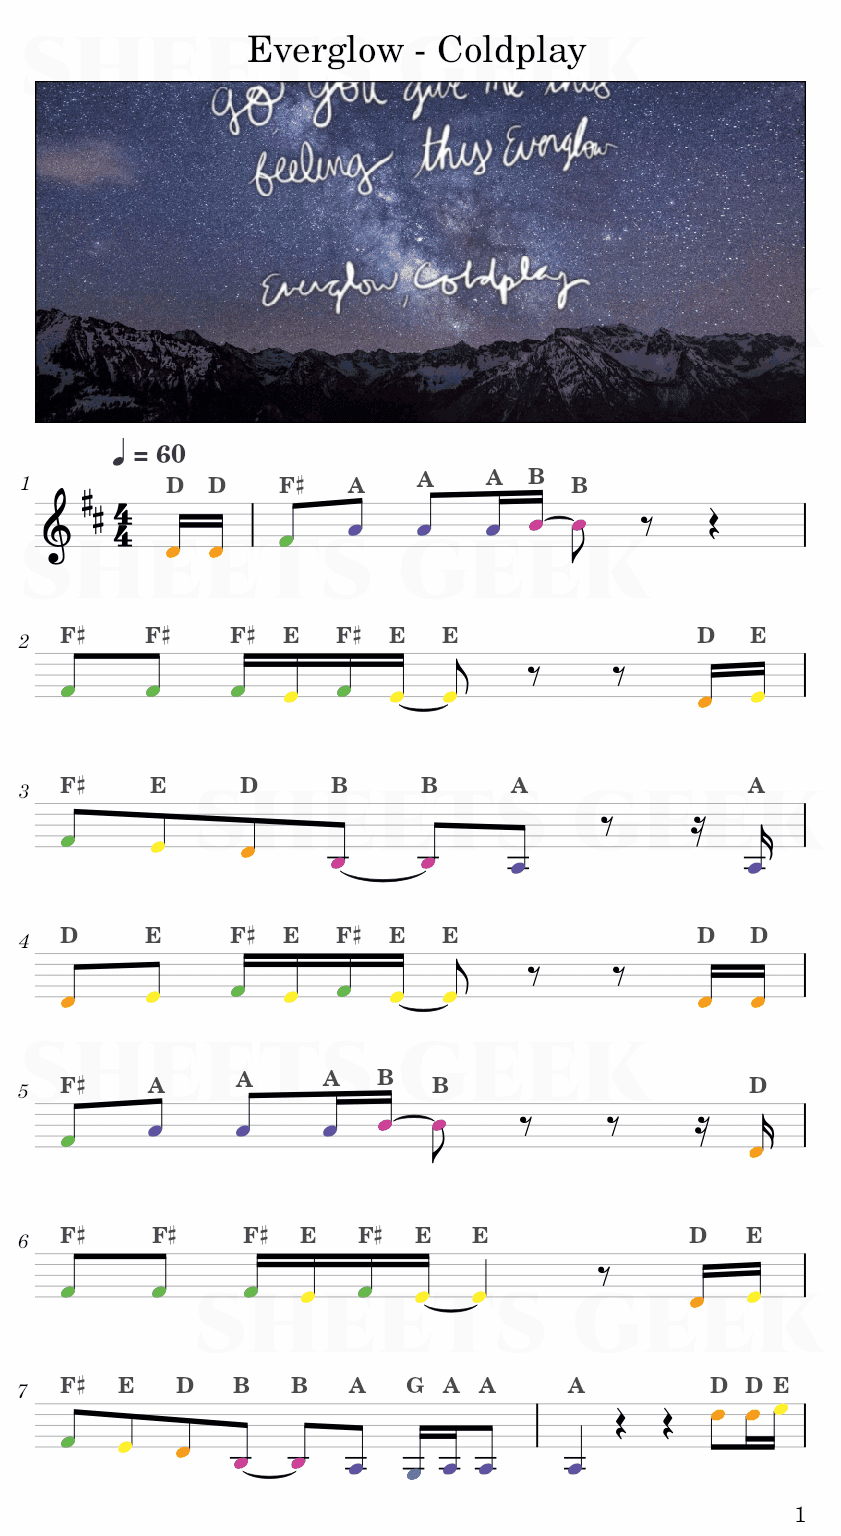 Everglow - Coldplay Easy Sheet Music Free for piano, keyboard, flute, violin, sax, cello page 1